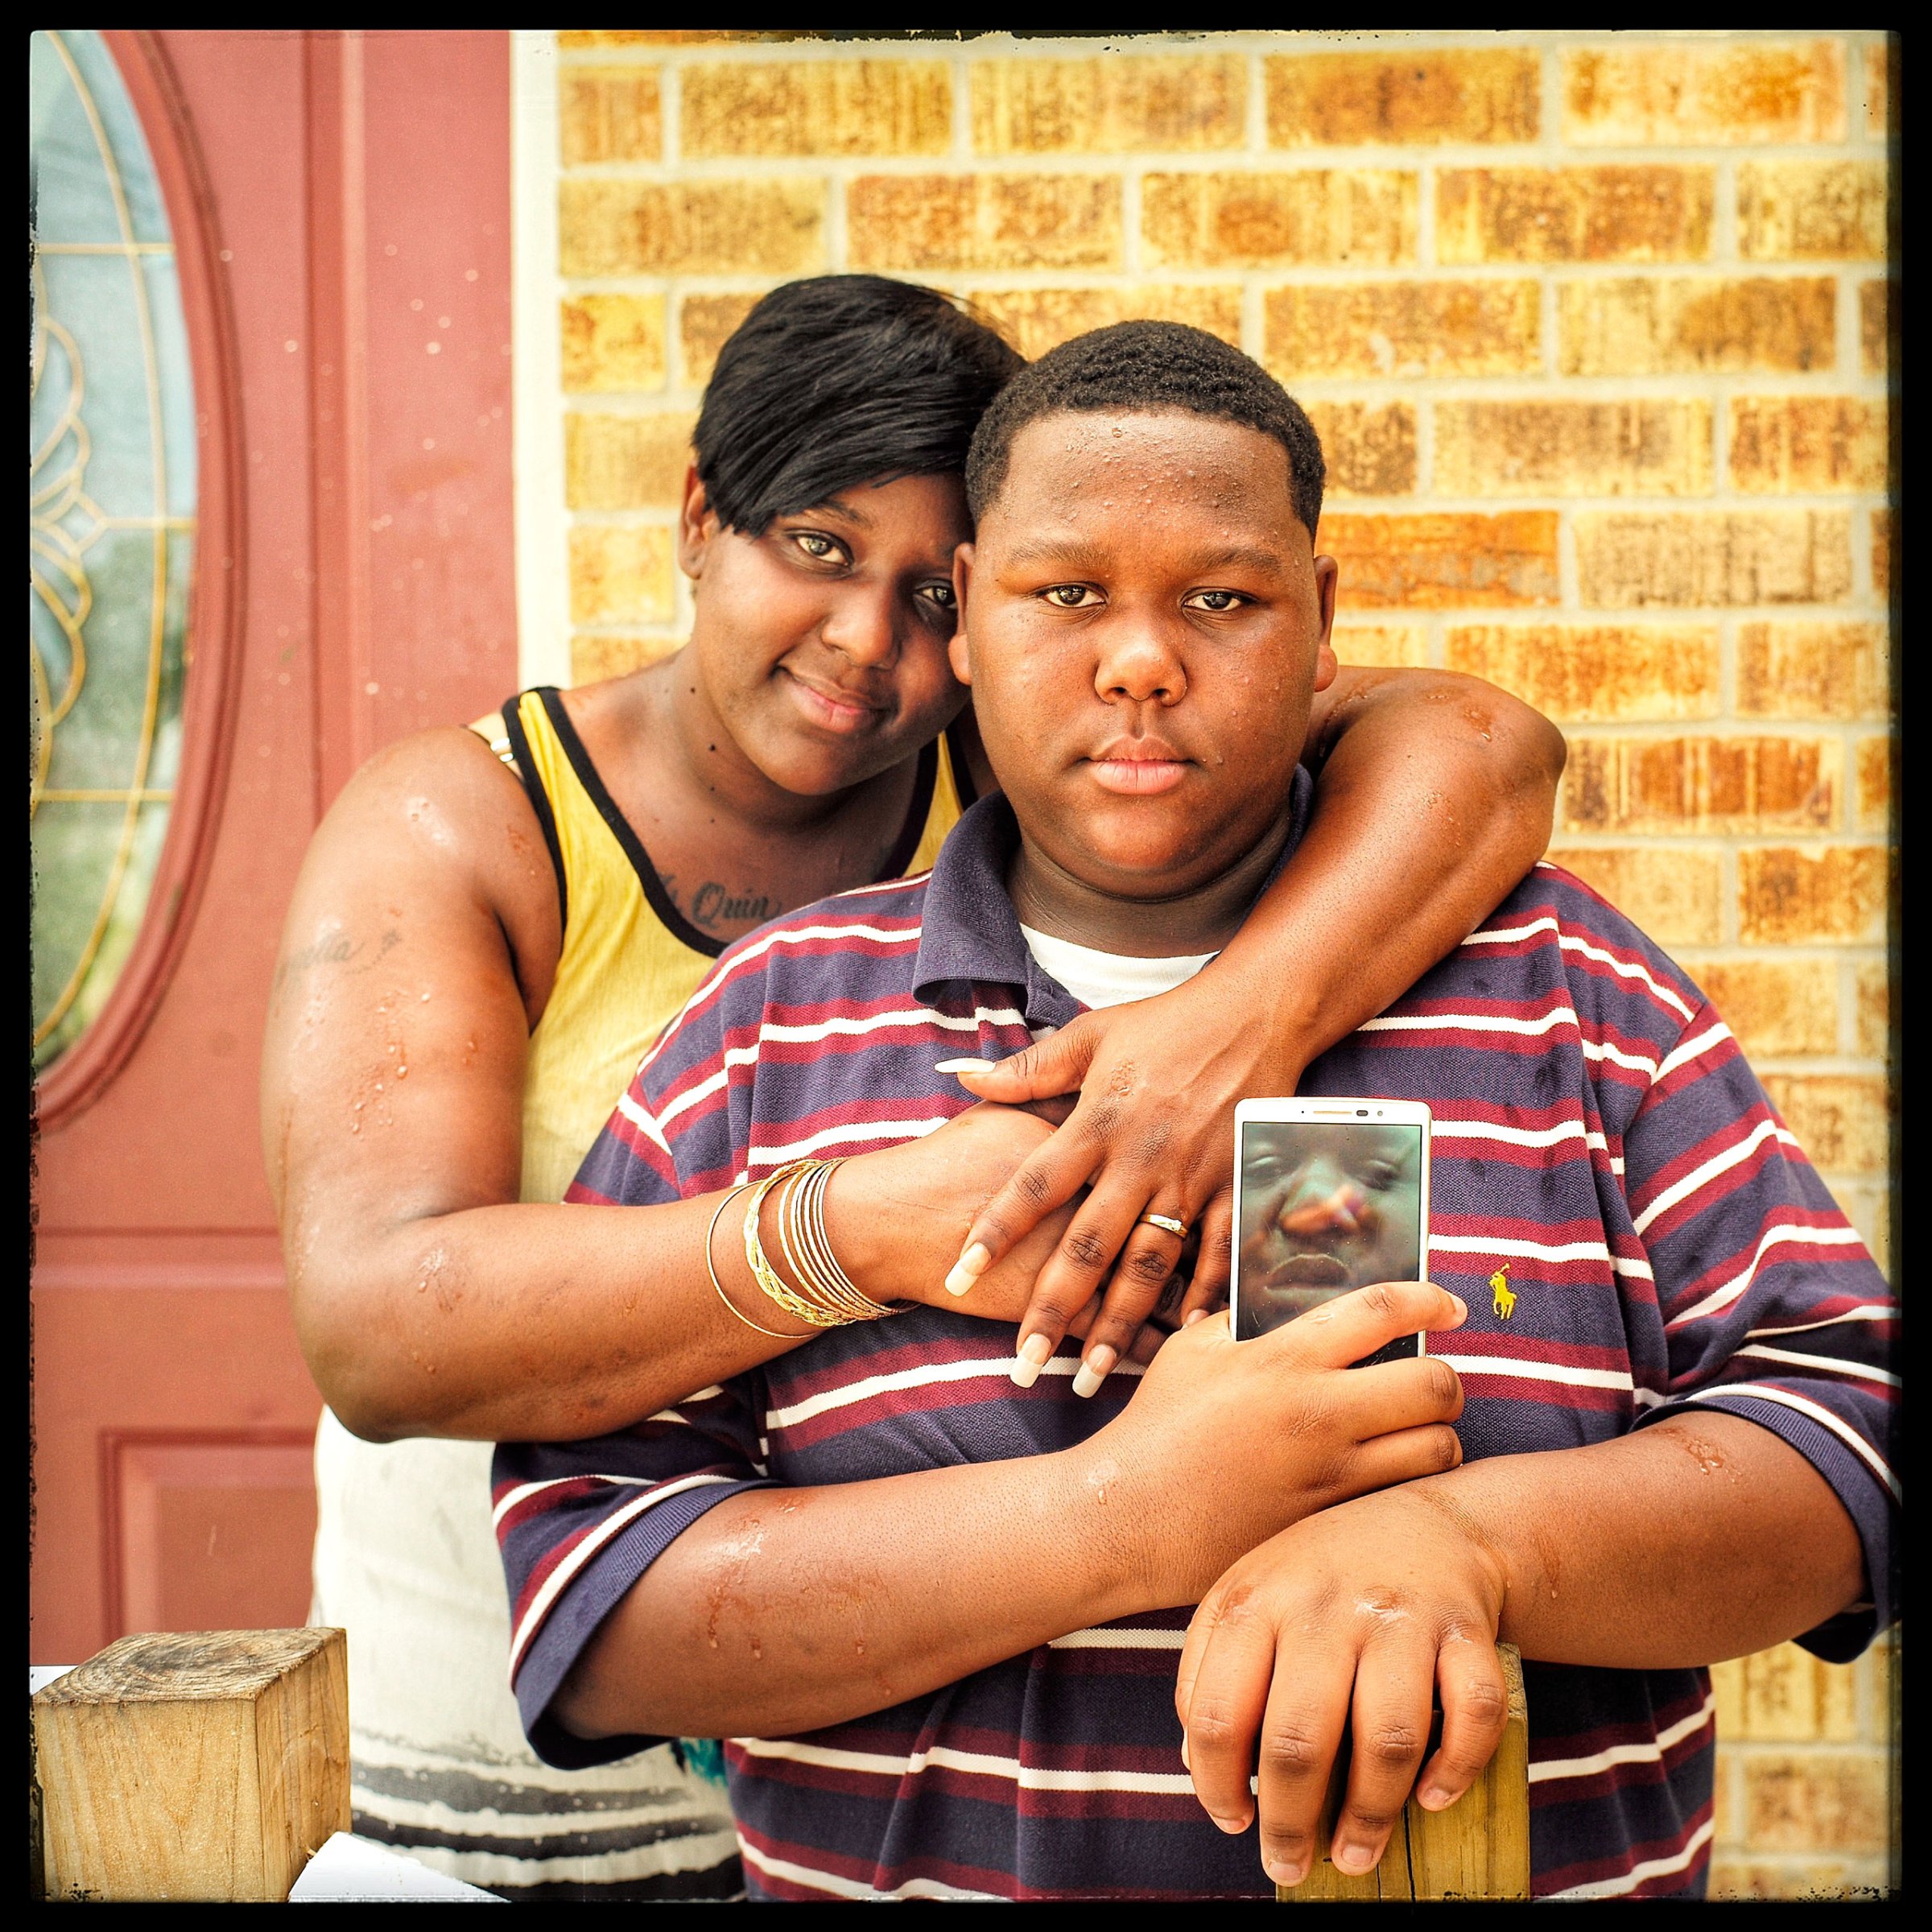 Cameron Sterling and his mother Quinyetta, in Baton Rouge, La., on July 12. Cameron, 15, holds a composite image he made of himself and his father Alton, who was fatally shot by police on July 5. “The police took his phone, so all the pictures he took are gone,” Cameron says. “Today has been a peaceful day so far. There was less drama today.”